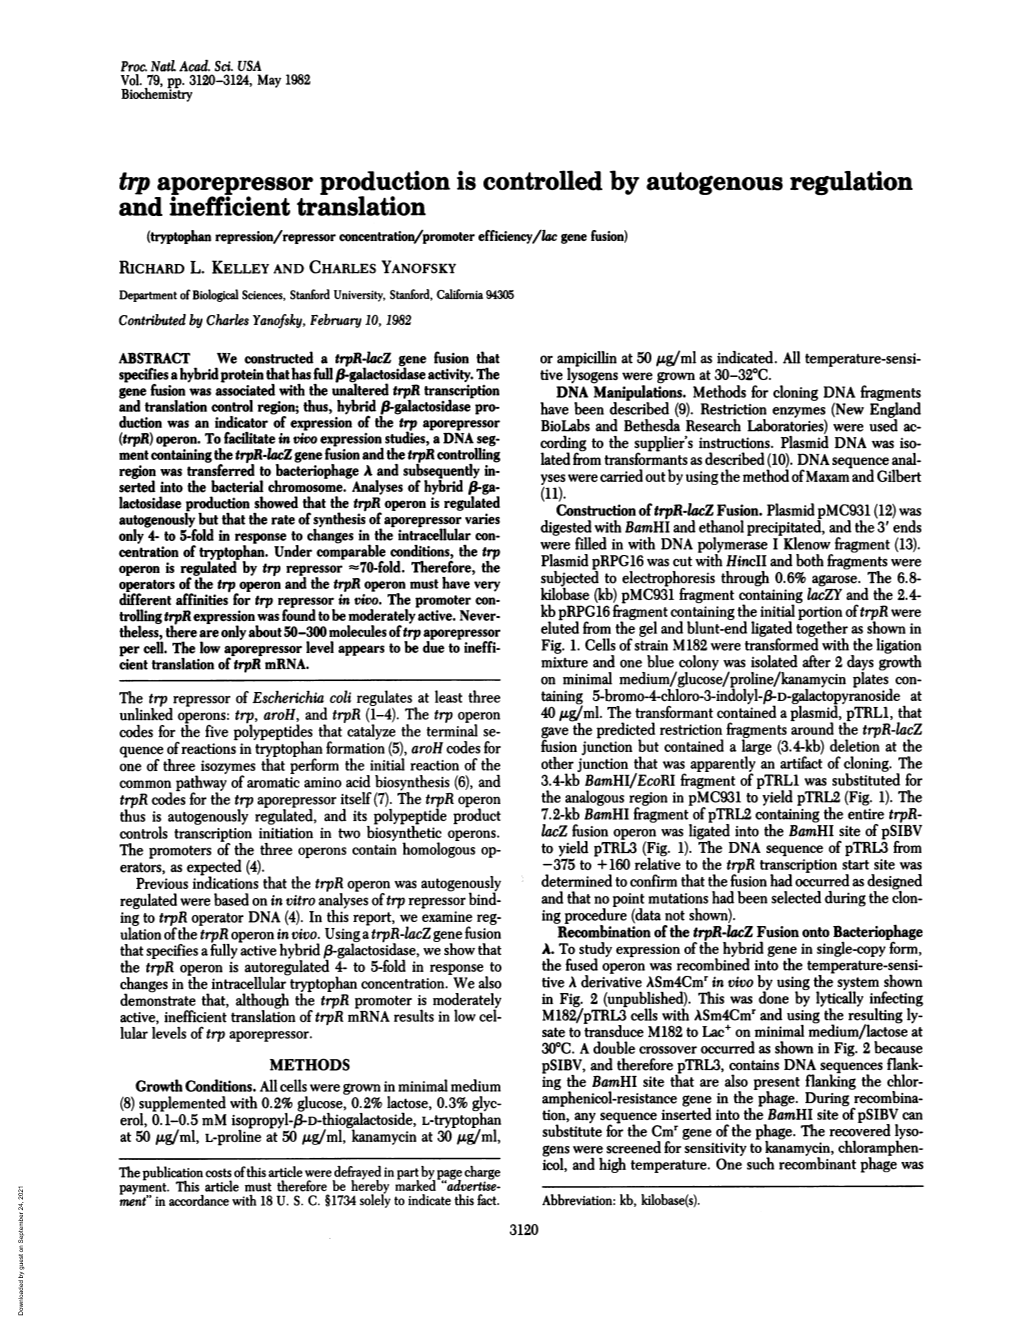 Trp Aporepressor Production Is Controlled by Autogenous